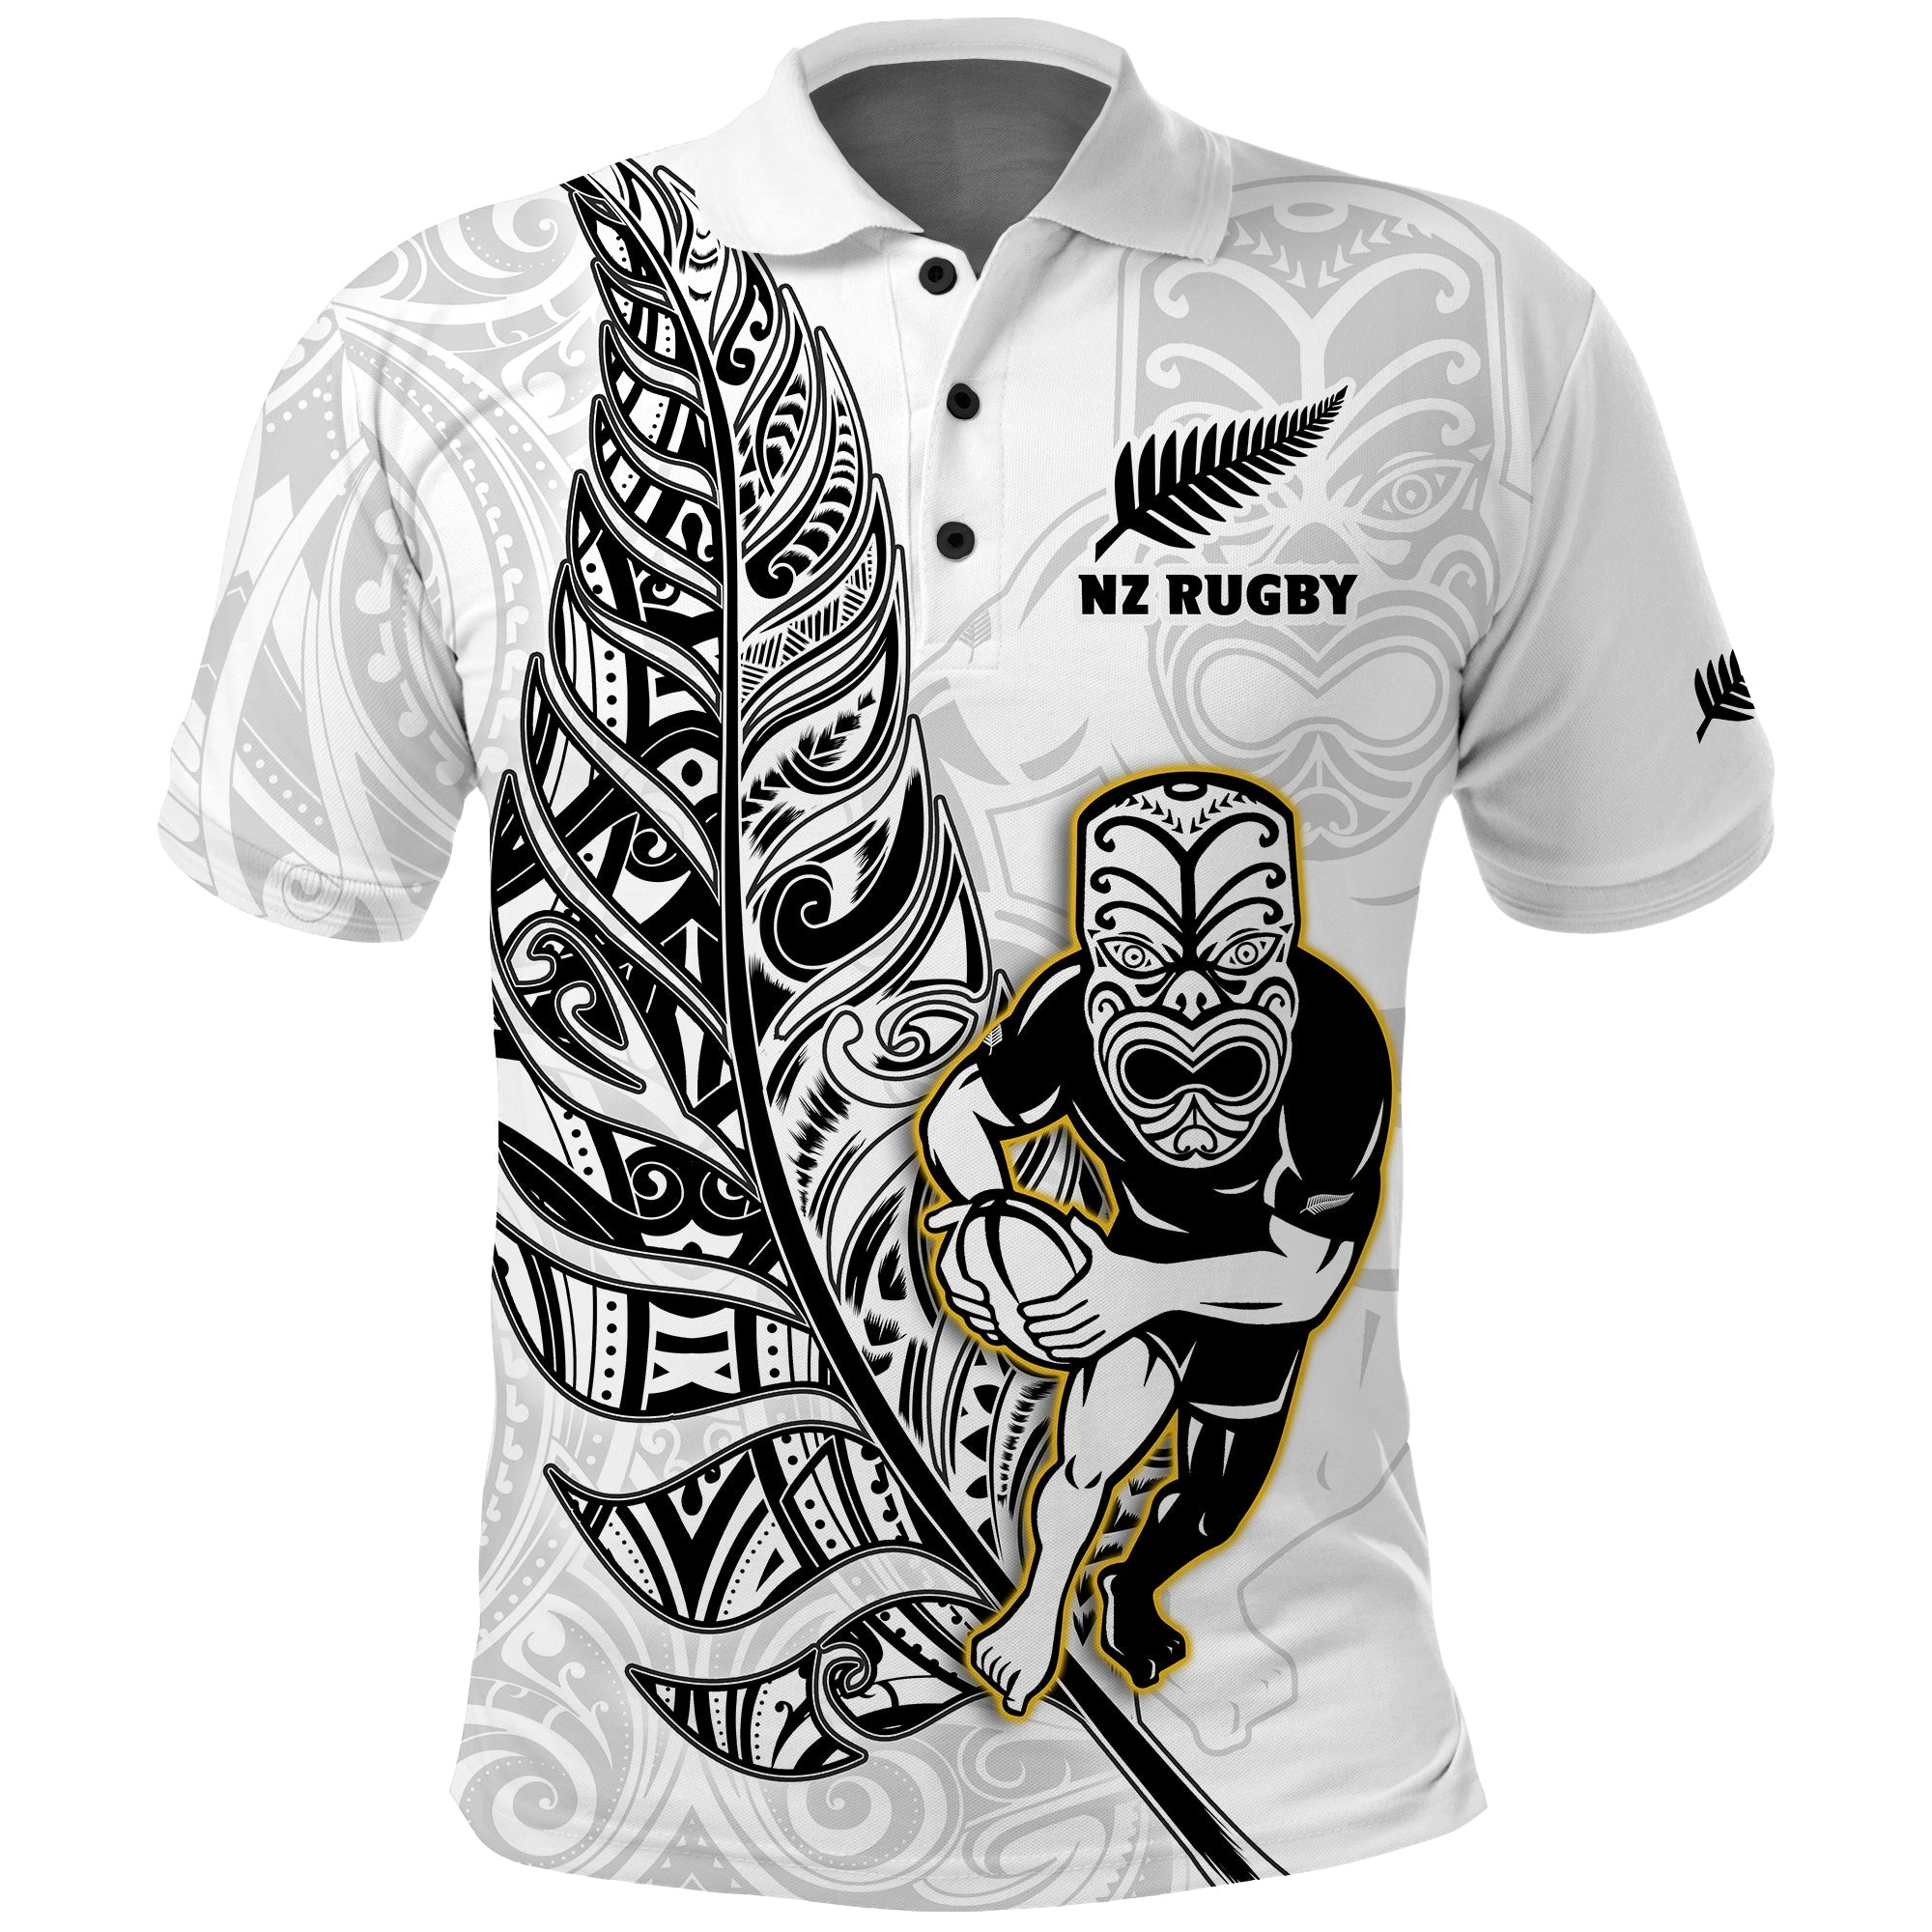 (Custom Text and Number) New Zealand Silver Fern Rugby Polo Shirt All Black Maori Version White LT14 White - Polynesian Pride